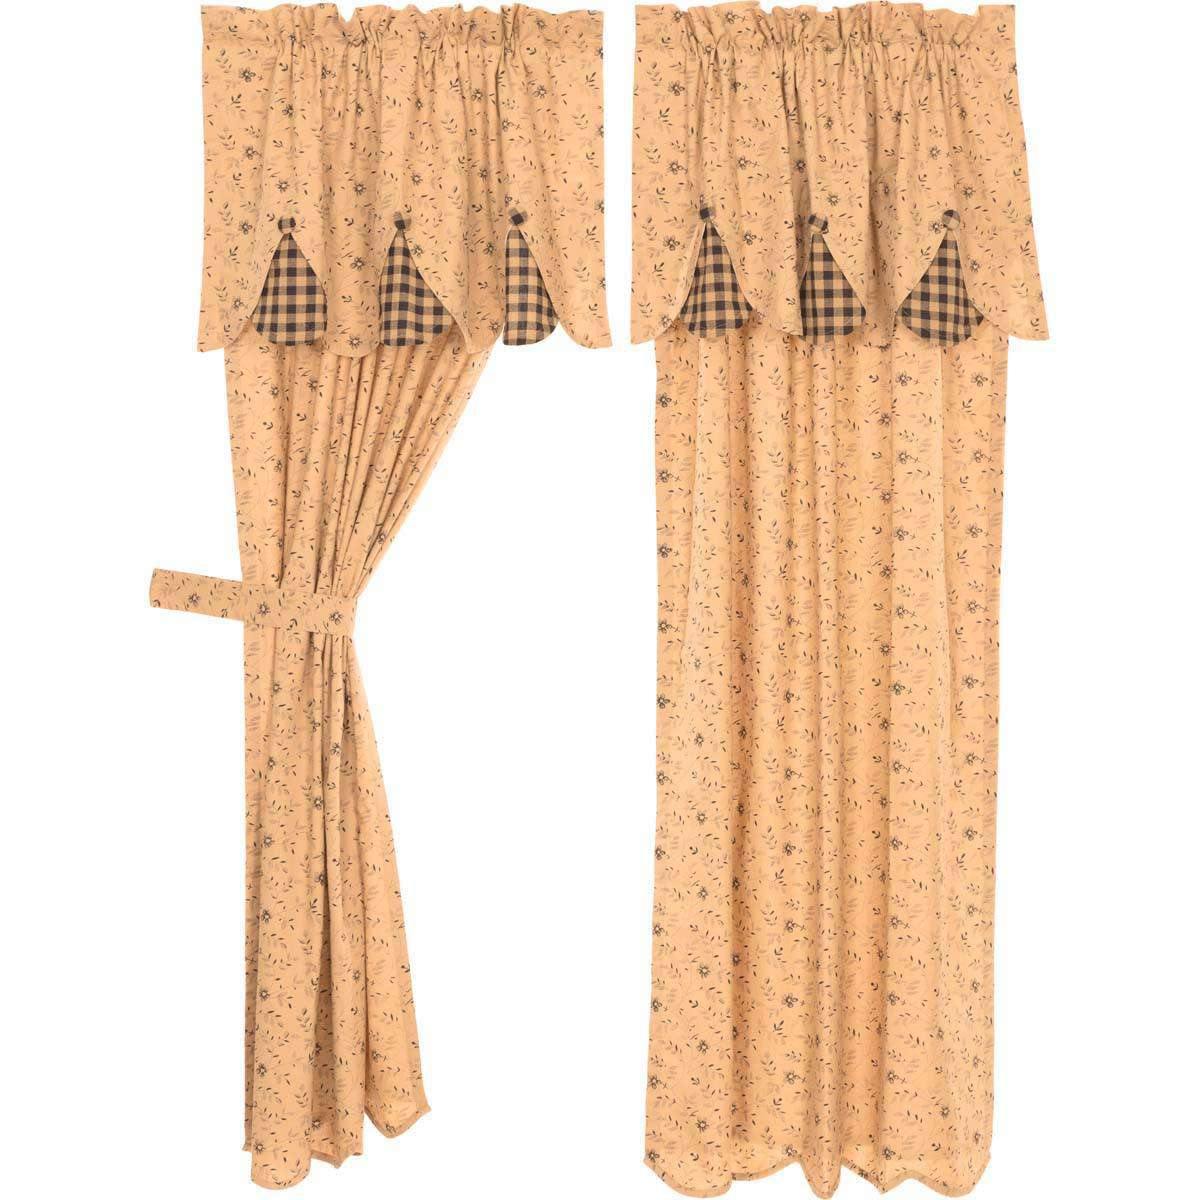 Maisie Short Panel Curtain Curtain Attached Scalloped Layered Valance Set of 2 63x36 - The Fox Decor